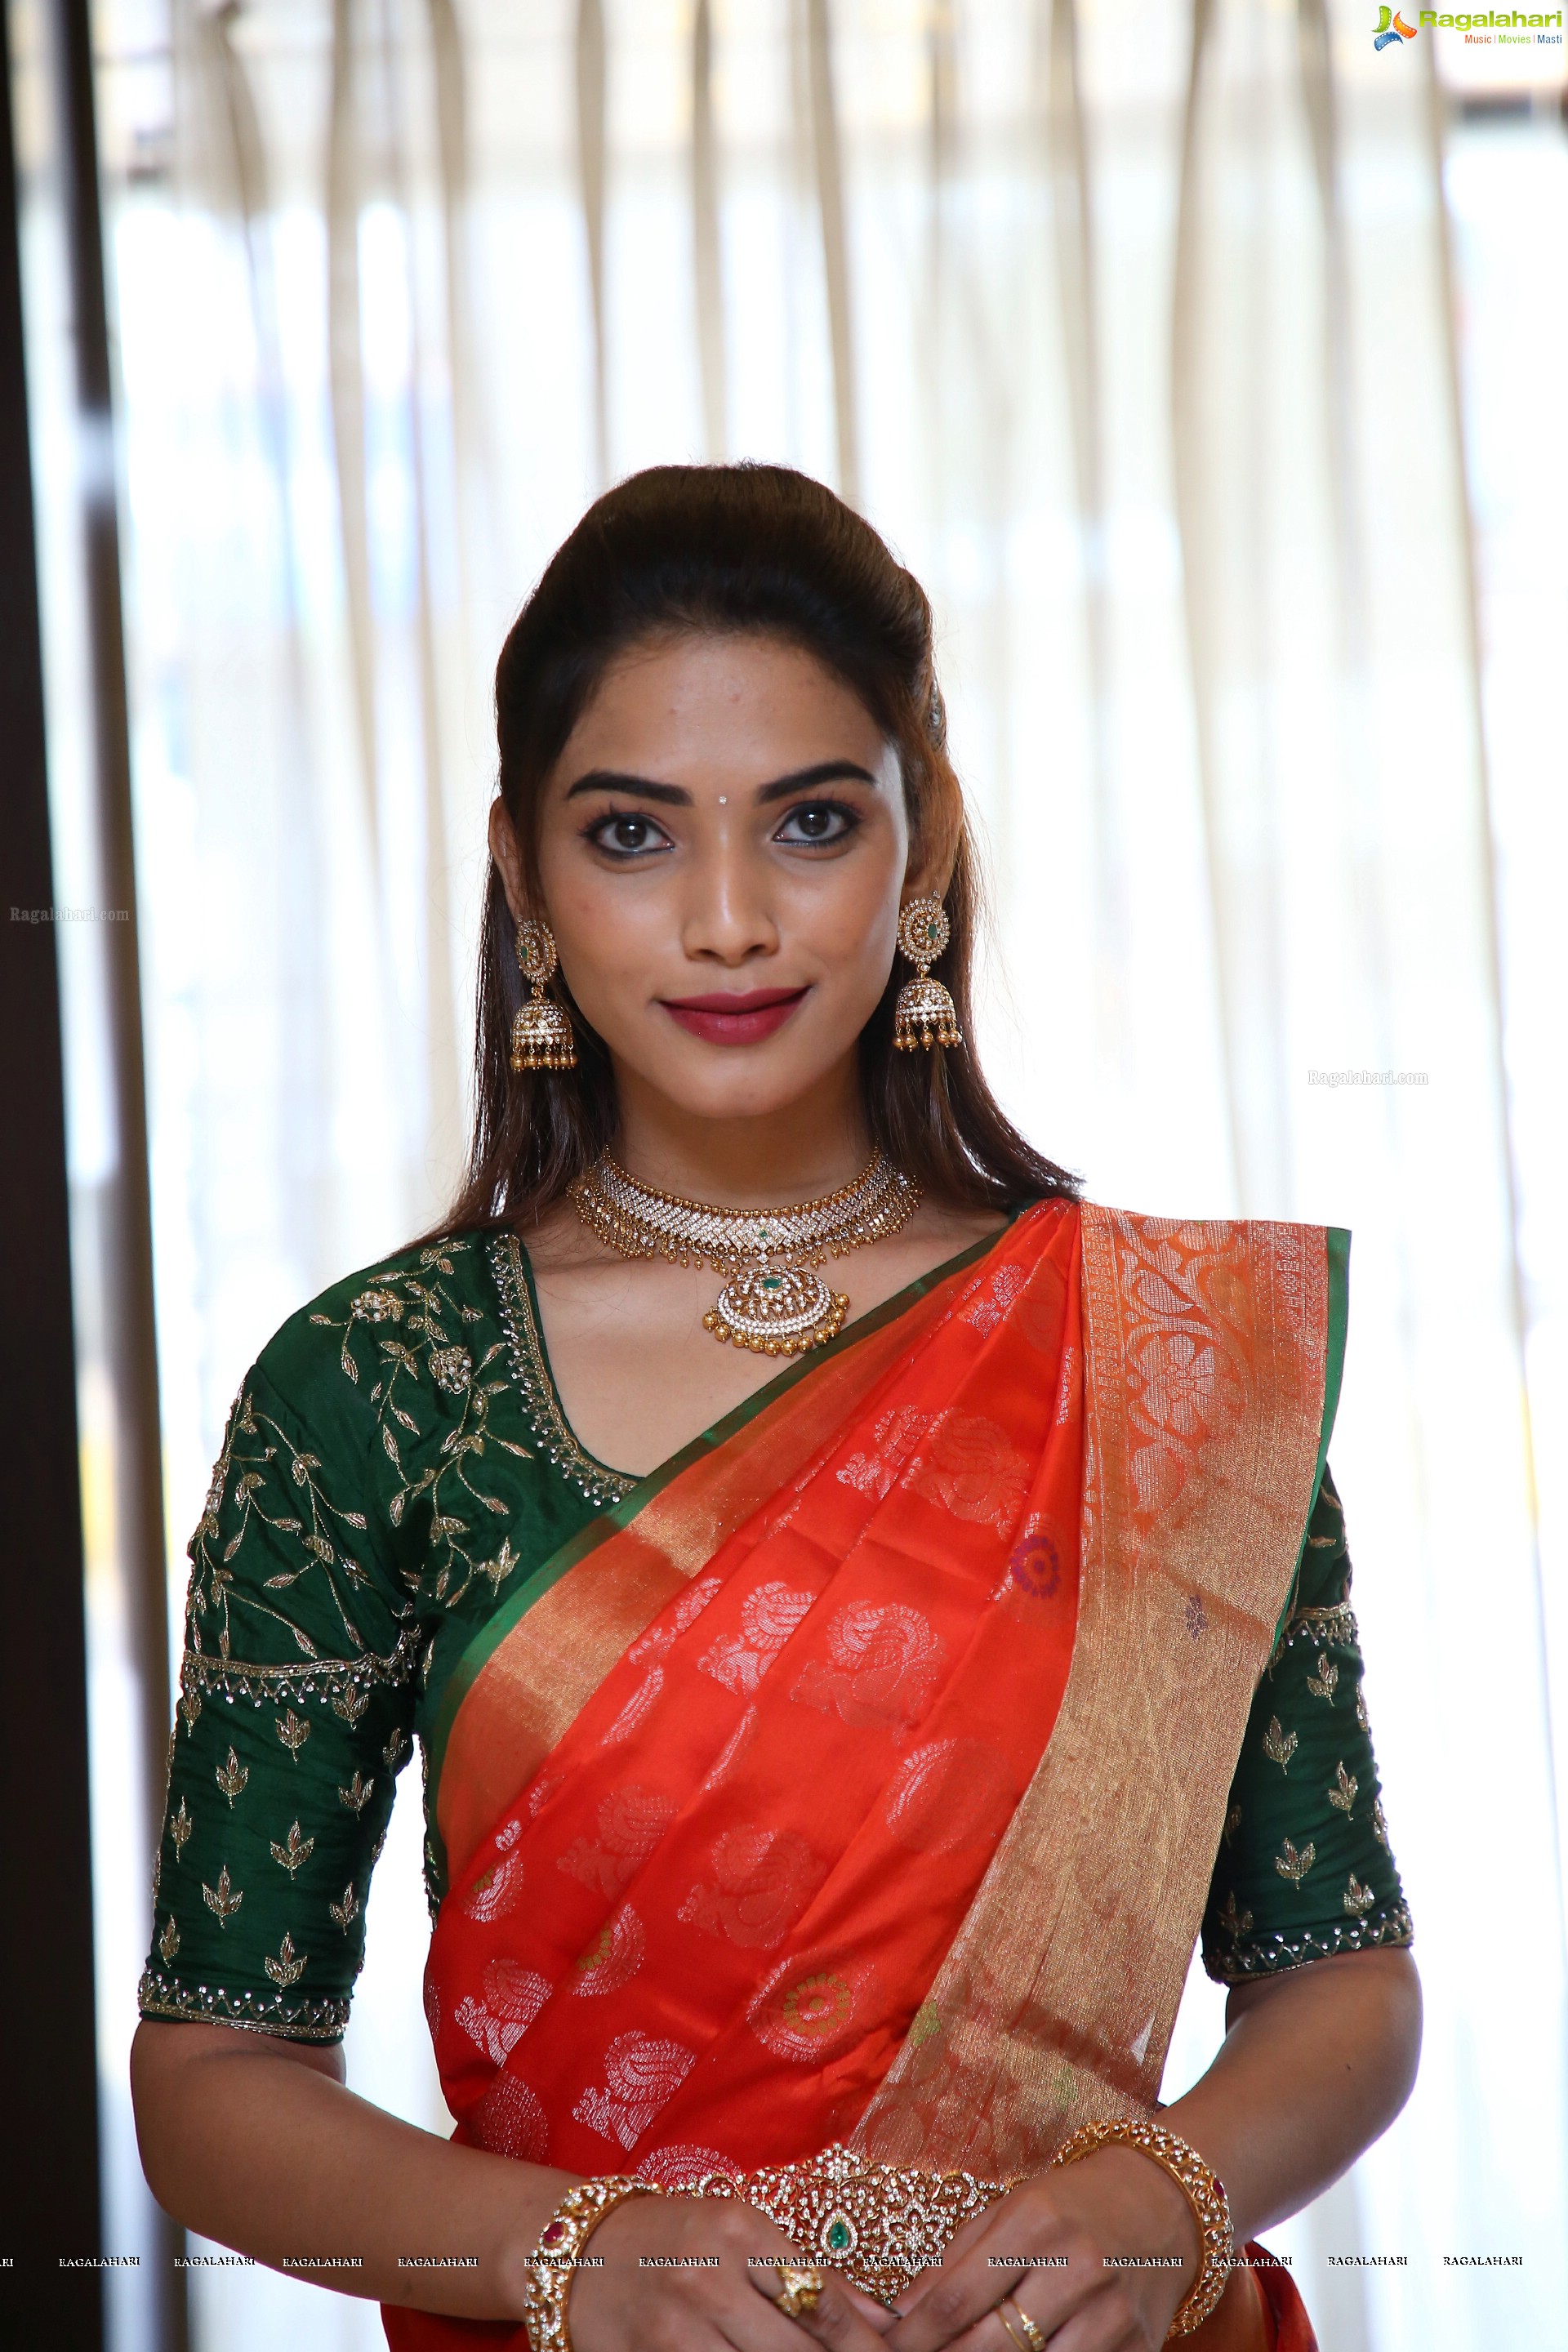 Harshini Balla Poses With Traditional Jewellery, HD Photo Gallery